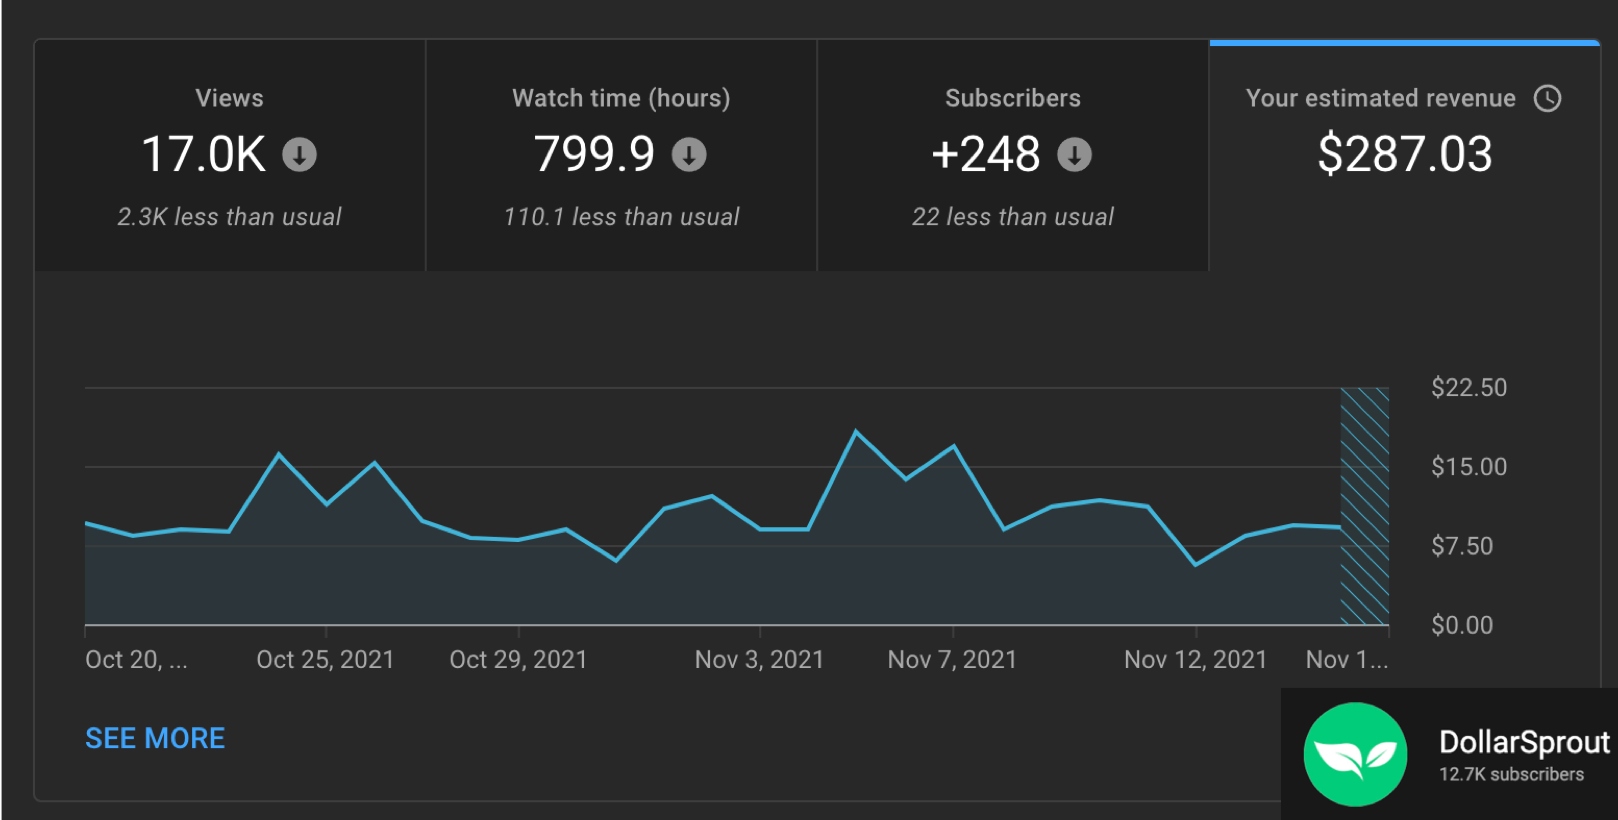 DollarSprout YouTube earnings dashboard